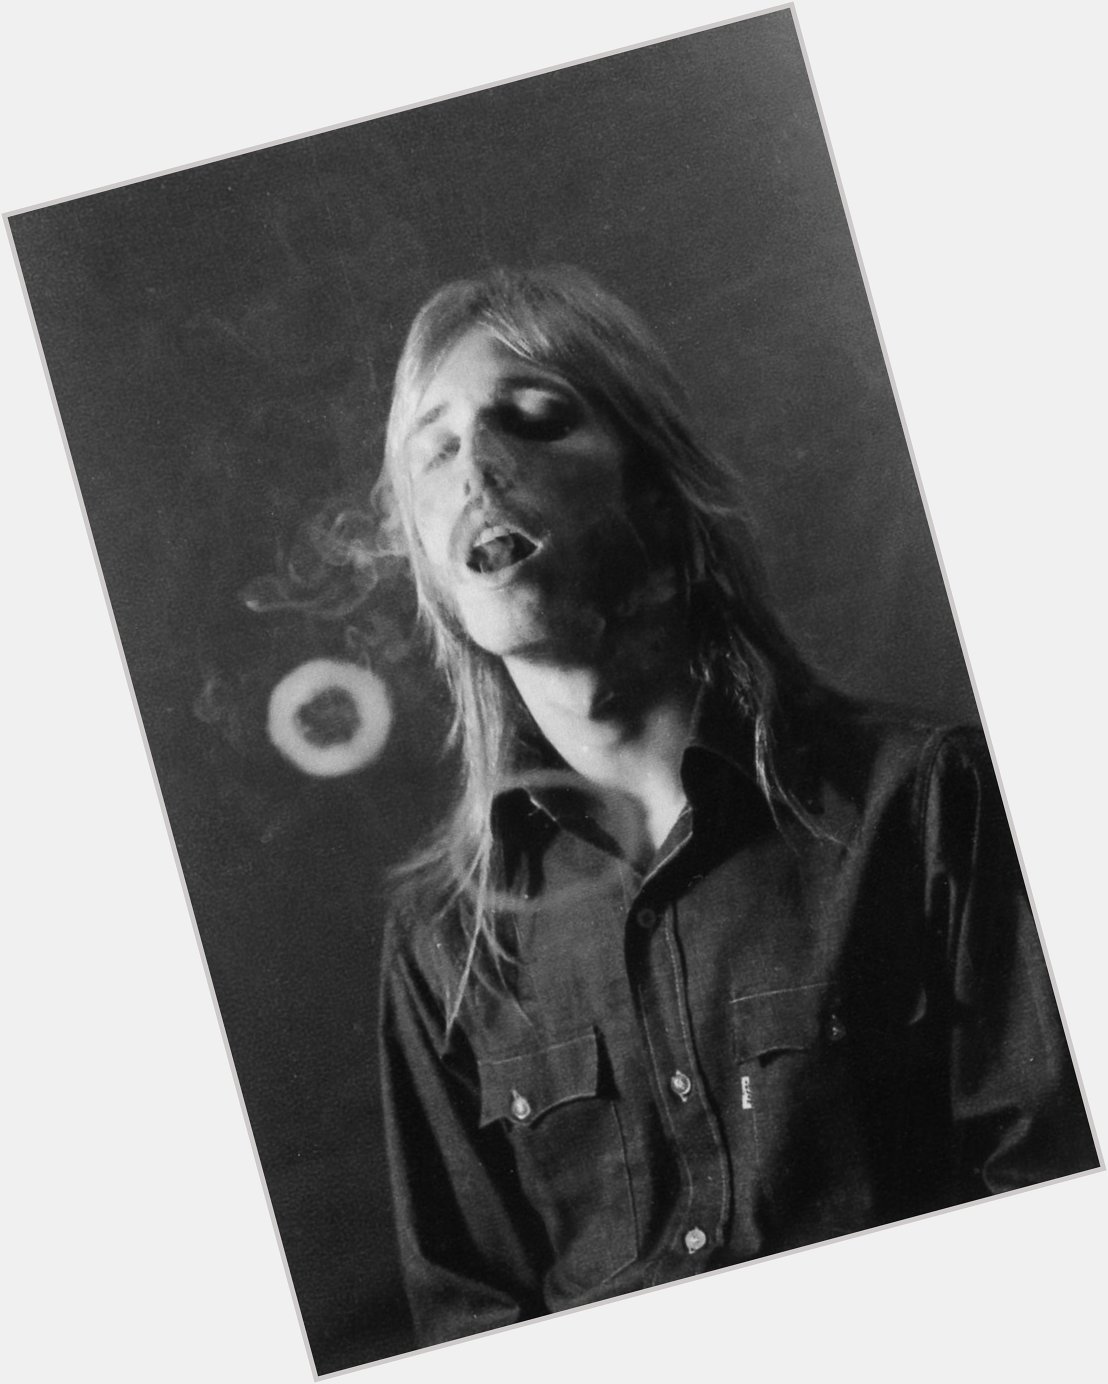 Happy birthday, Tom Petty. You were the coolest musician in rock history.  